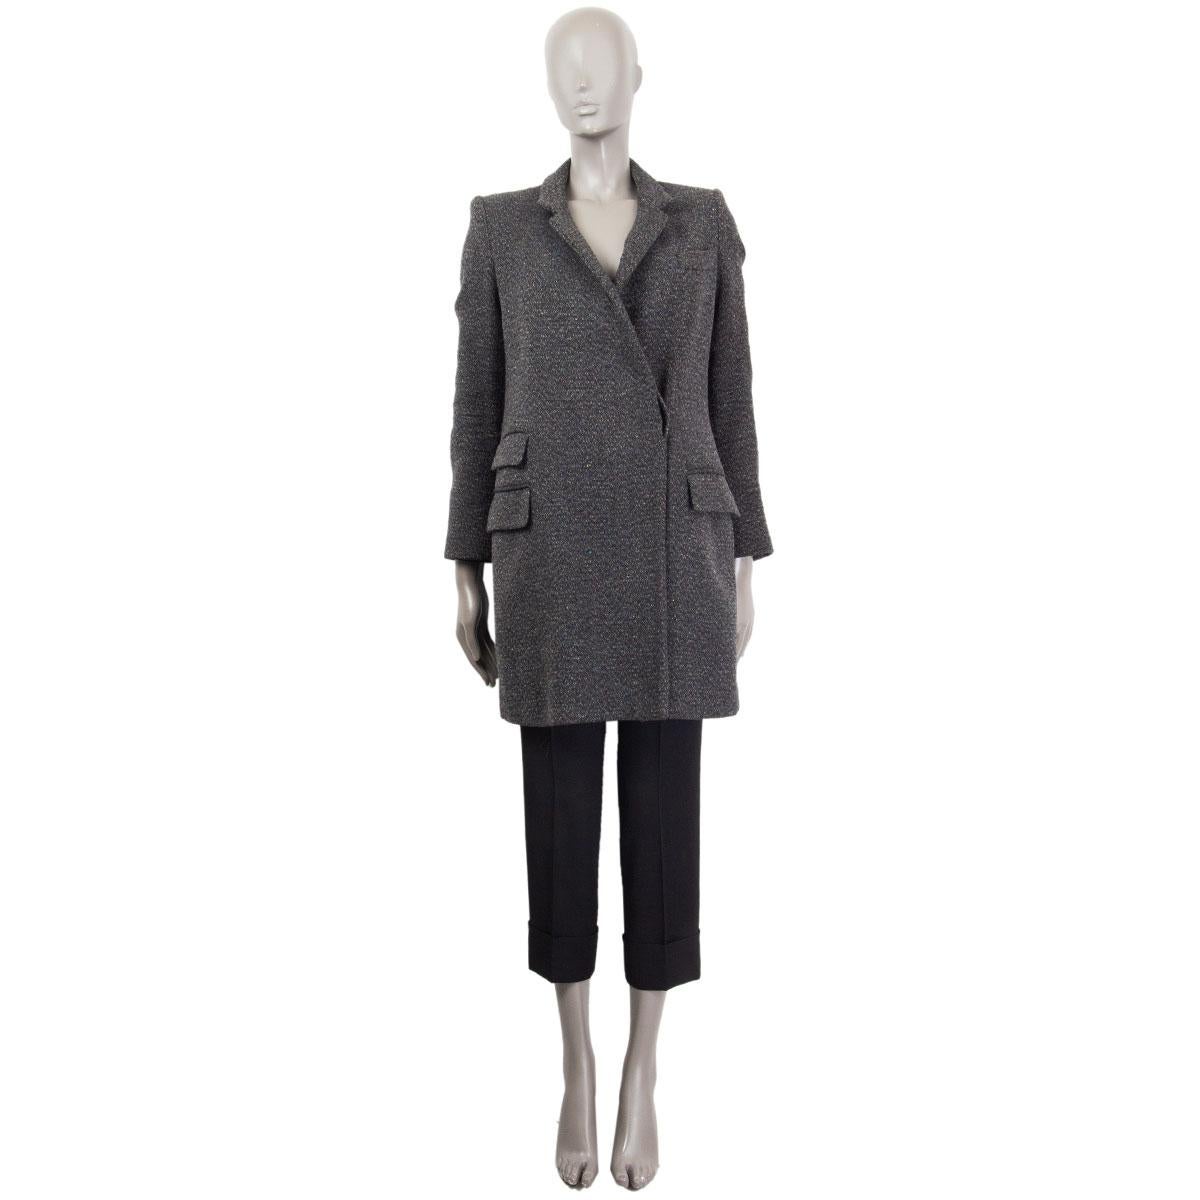 100% authentic Stella McCartney classic one button coat in dark grey, bottle green, black and grey tweed wool (67%), viscose (22%), polyamide (11%). Lined in black viscose (52%) and cotton (48%). Has three flap pockets and one chest pocket. Closes